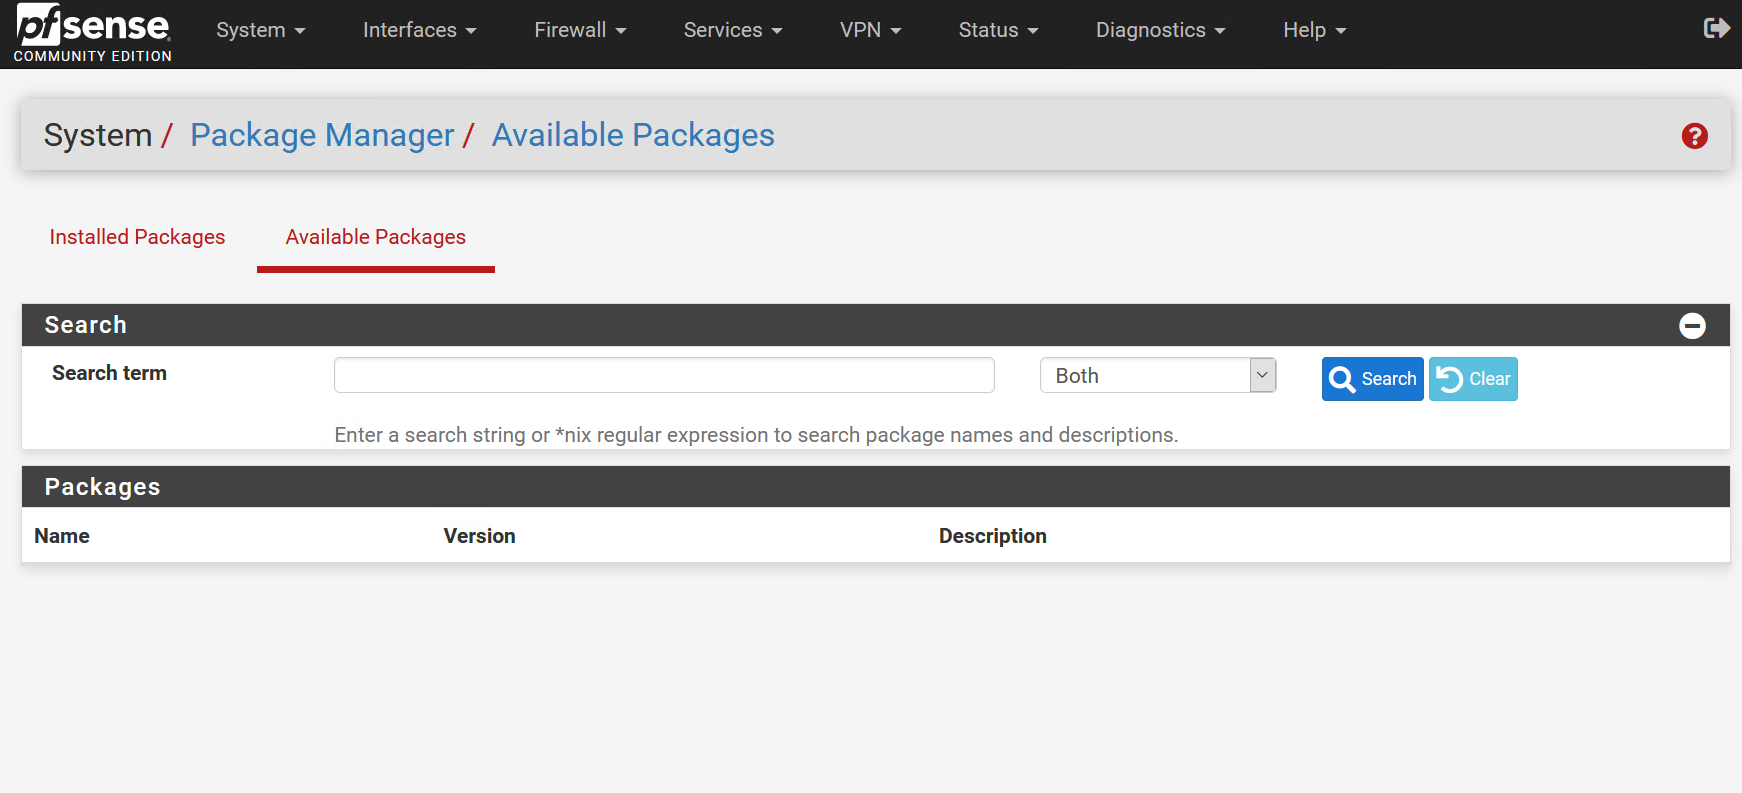 pfsense_package_manager1.png